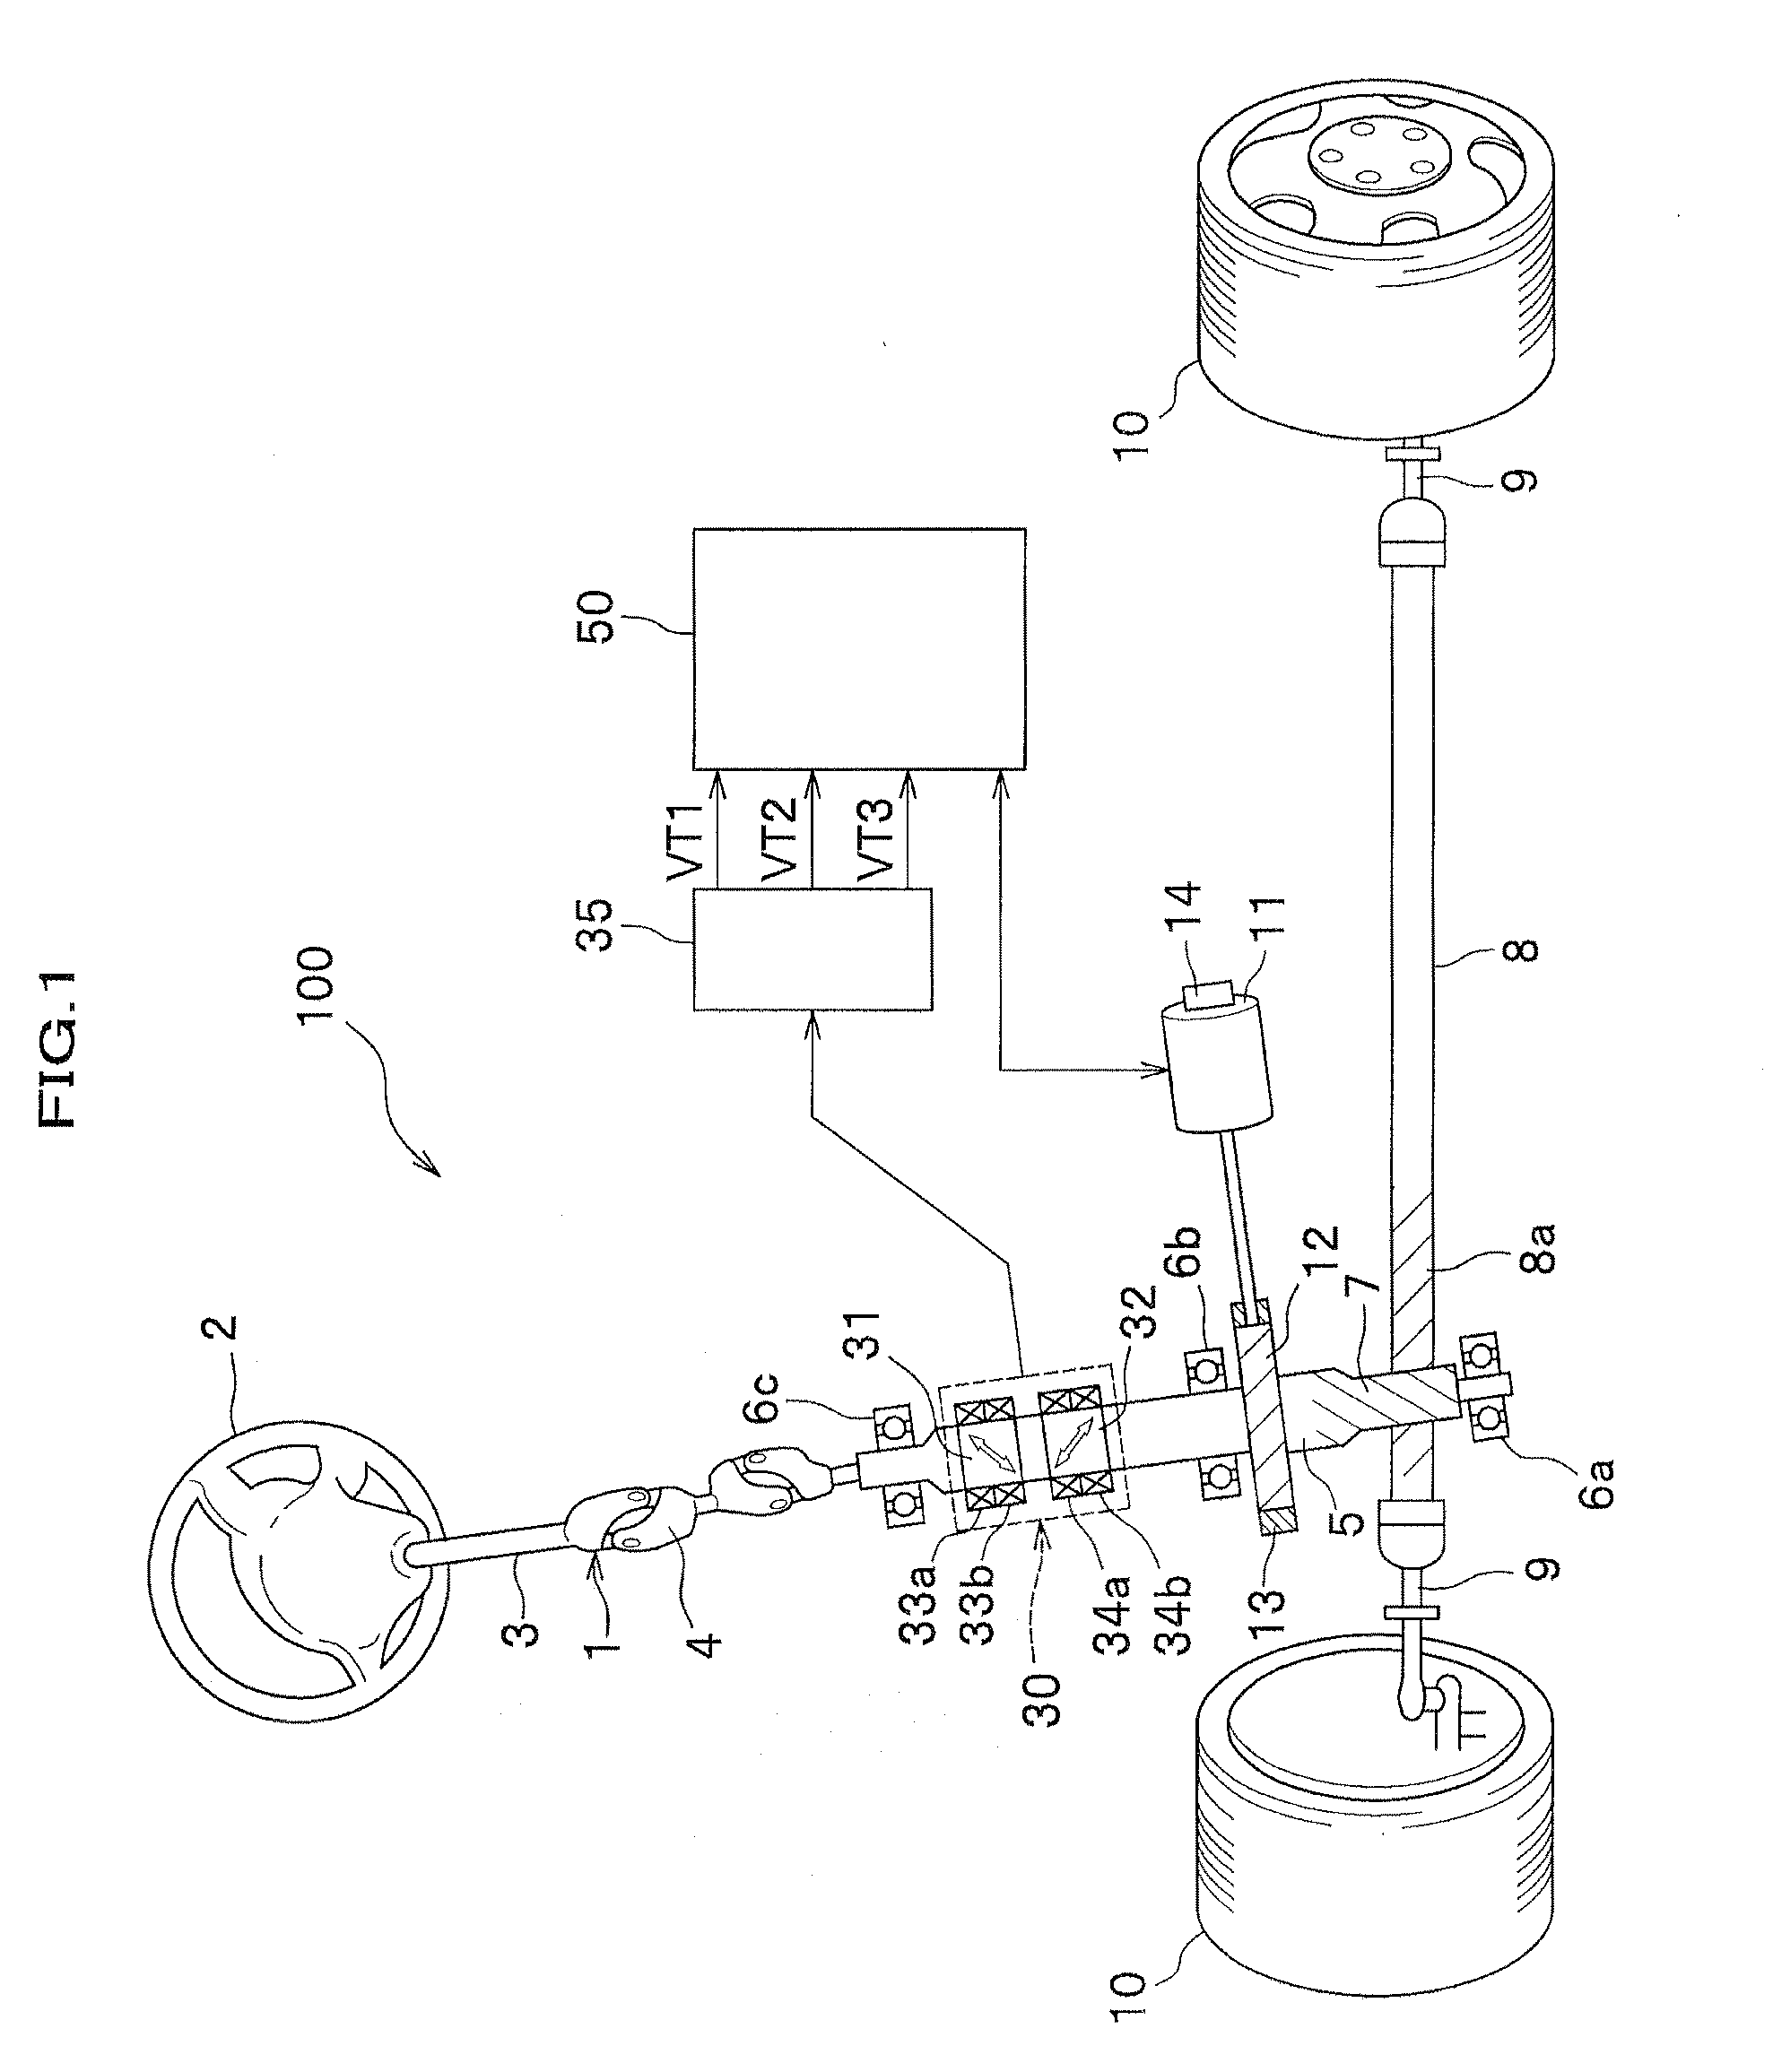 Controller of electric power-assist steering system